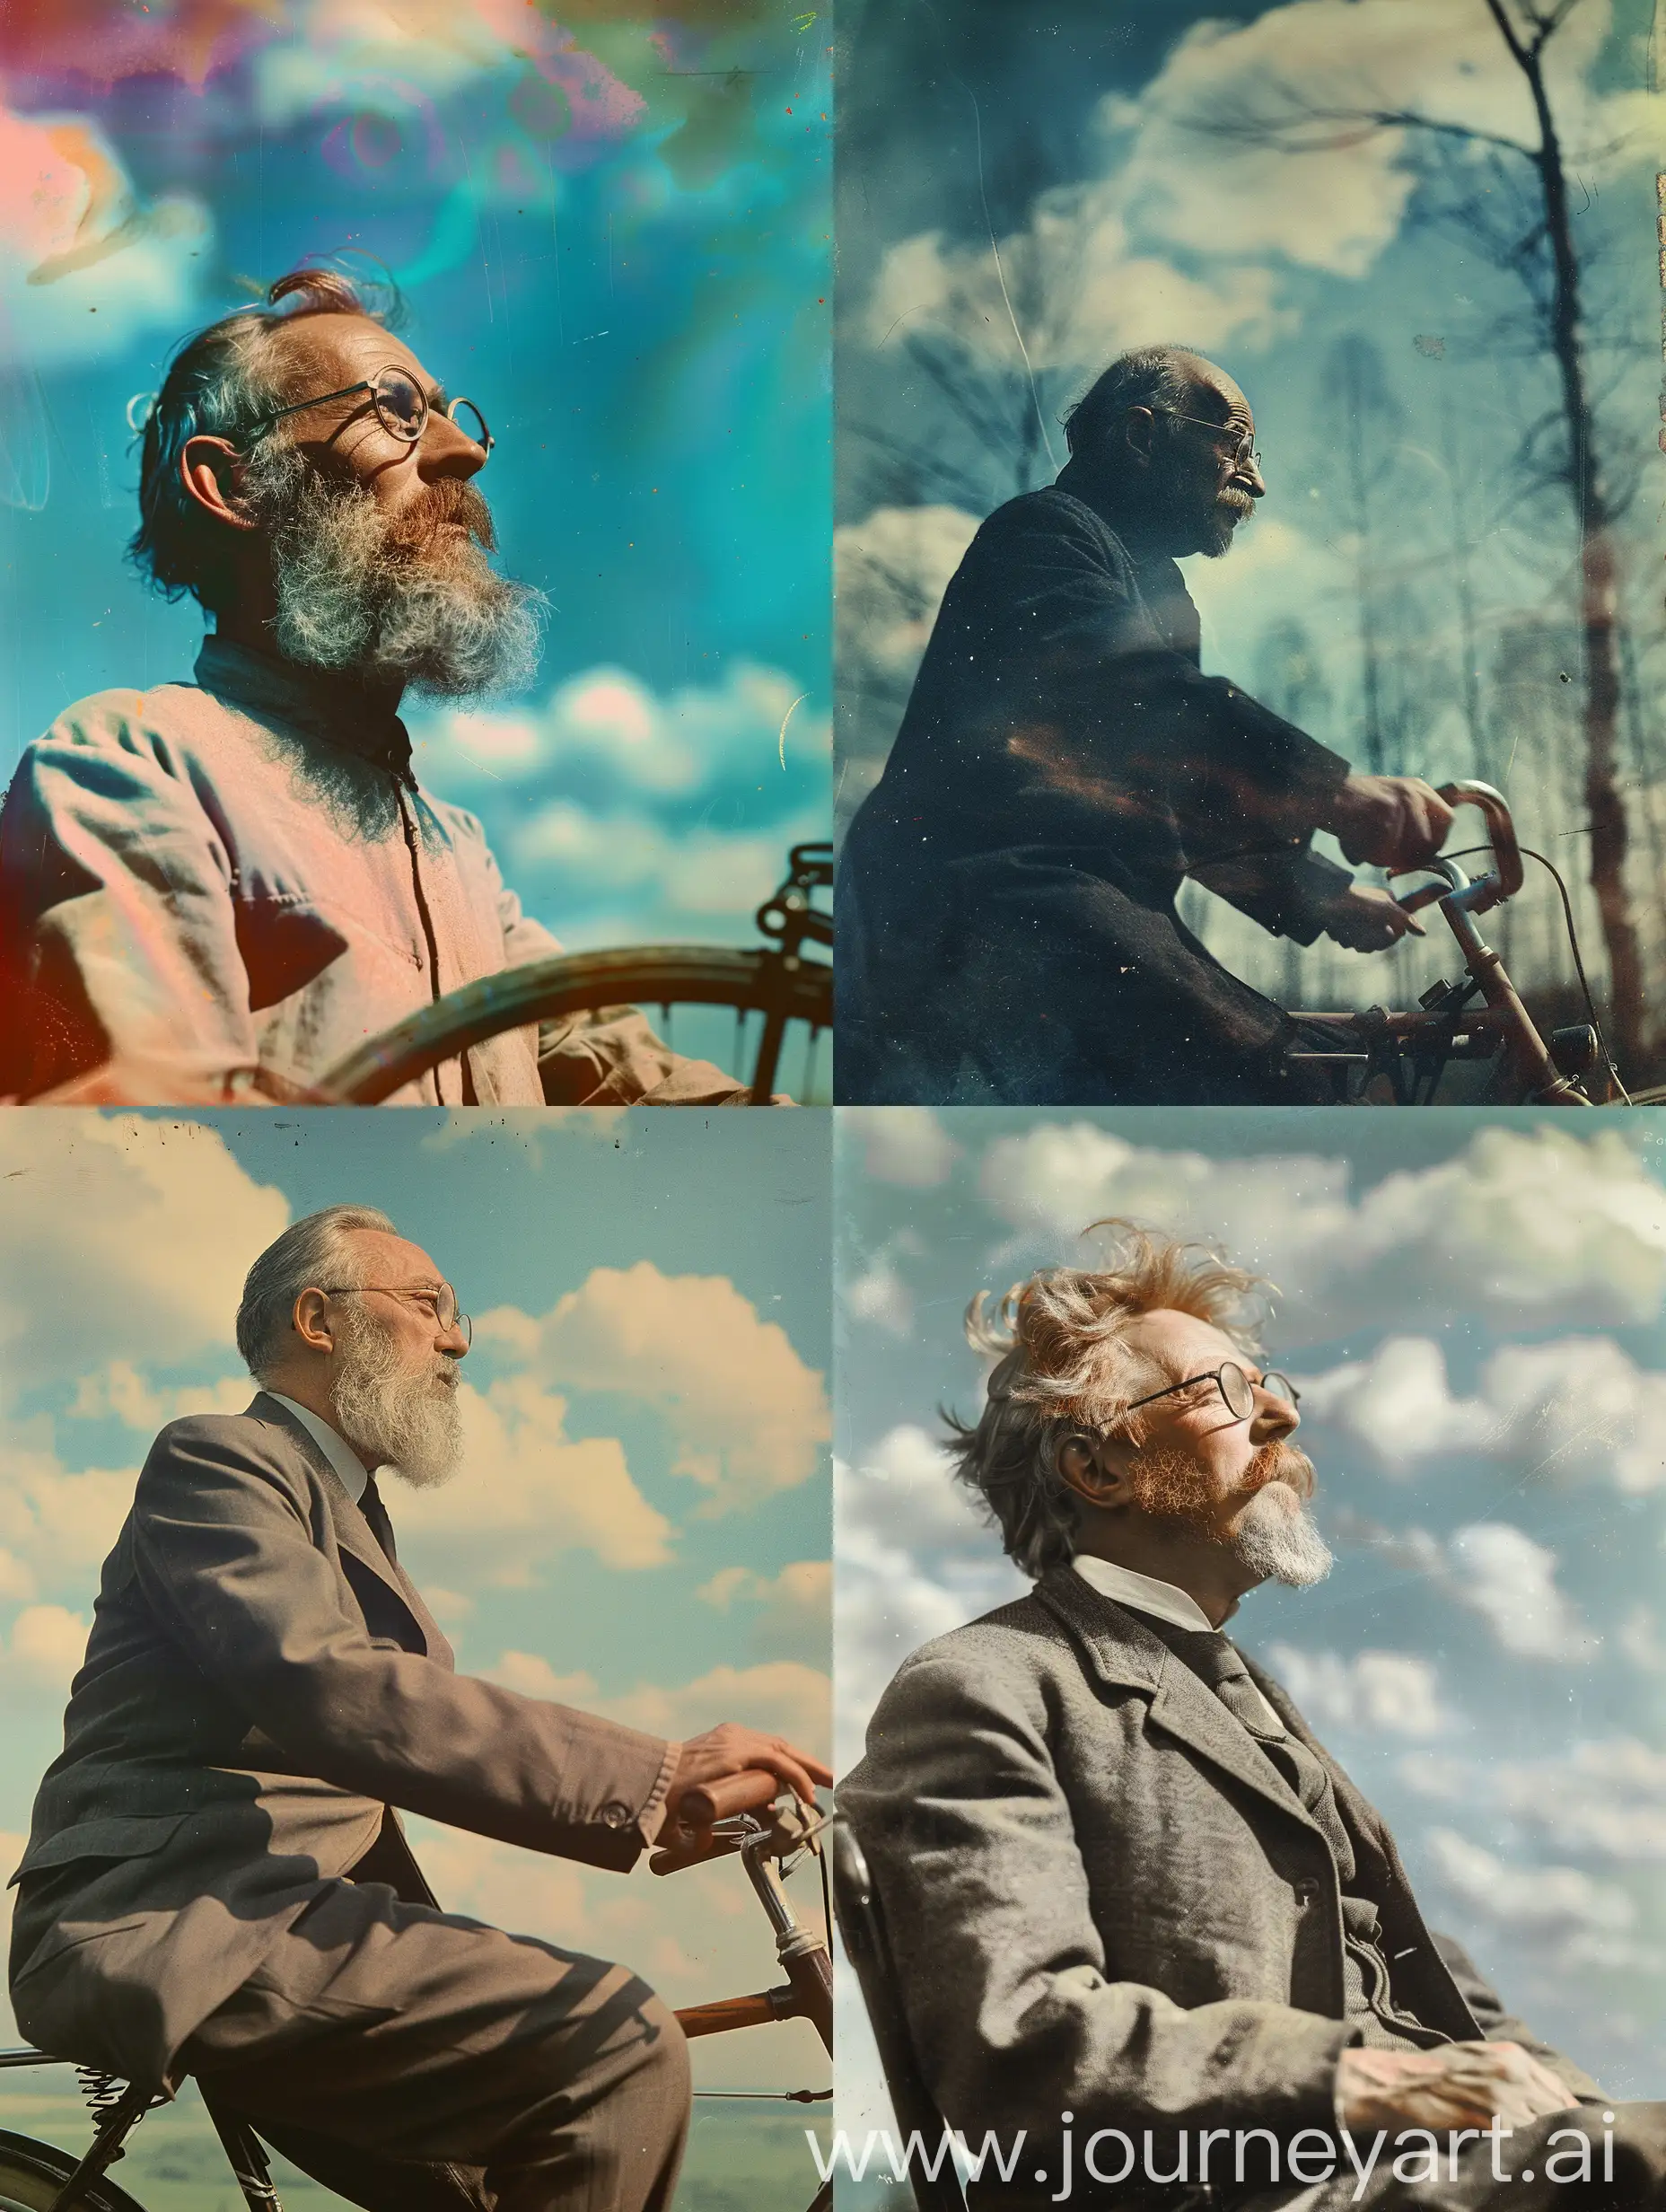 Tsiolkovsky-on-Bicycle-Gazing-at-the-Sky-in-Colored-Photo